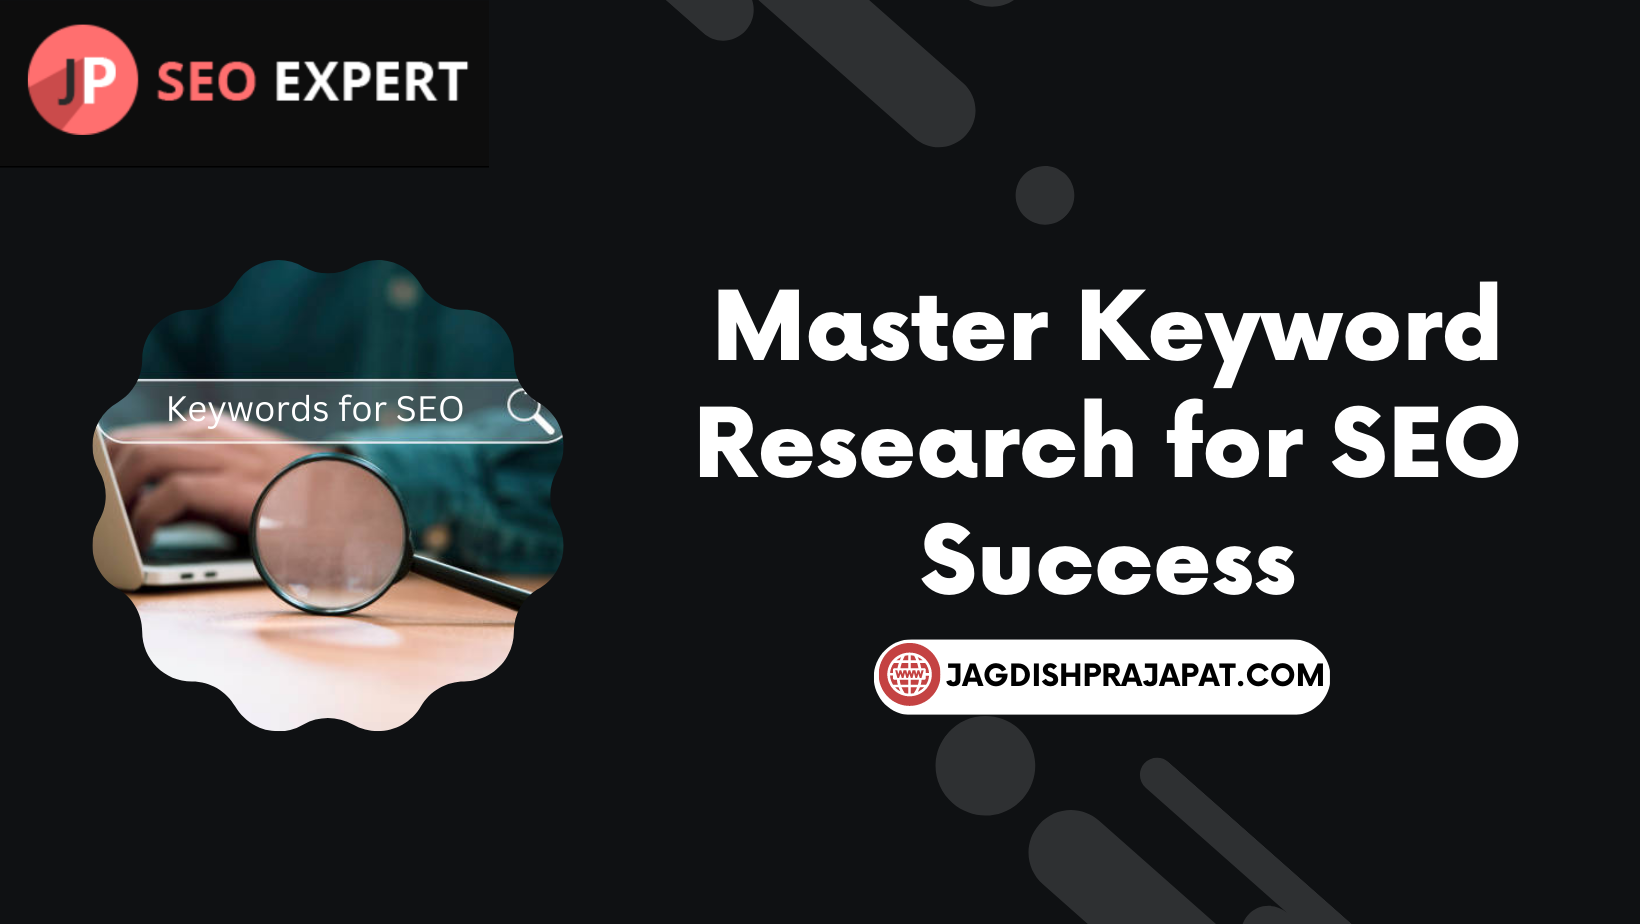 Mastering Keyword Research The Key To Seo Success 0110